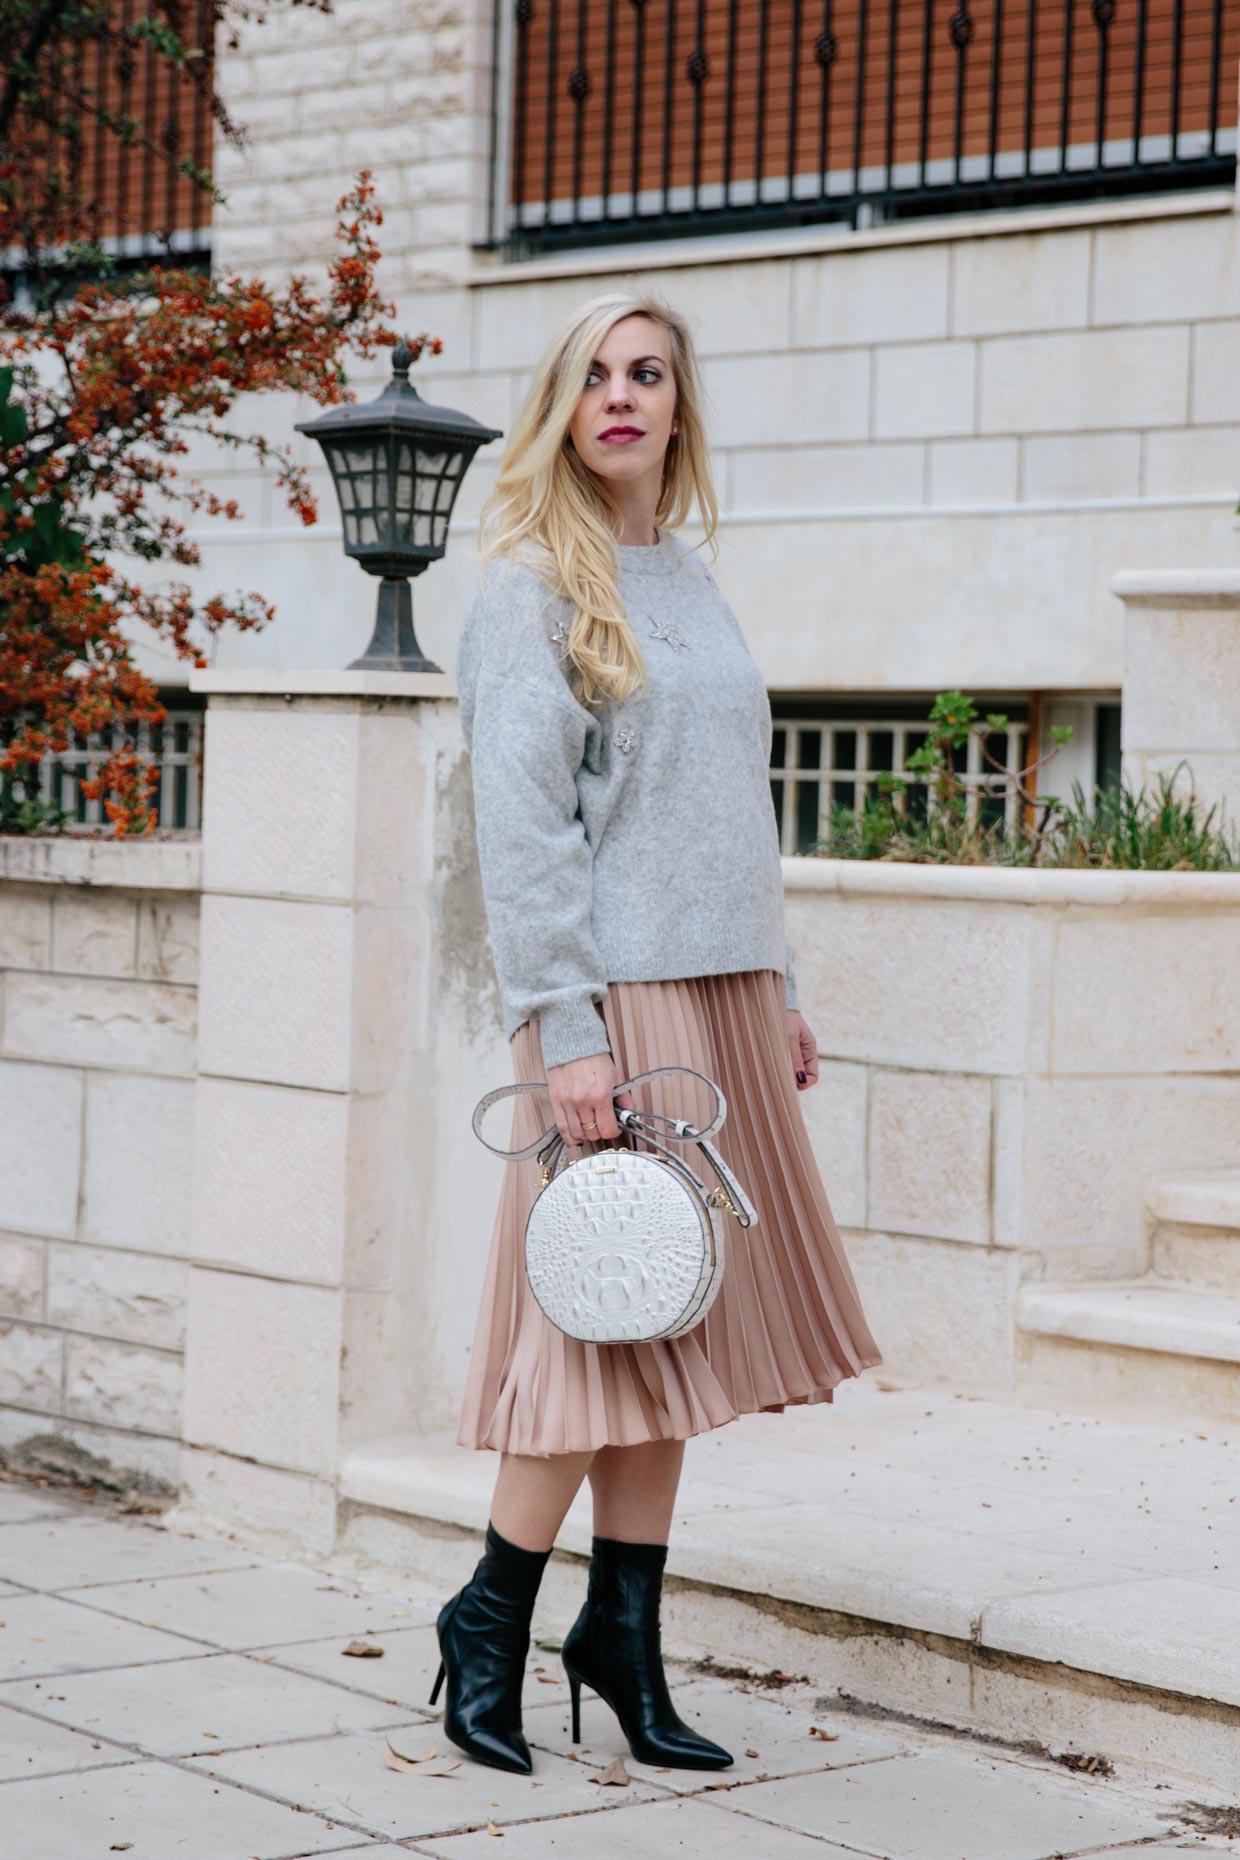 Cozy & Festive Look for New Year's: Embellished Sweater and Pleated Skirt - Meagan's Moda